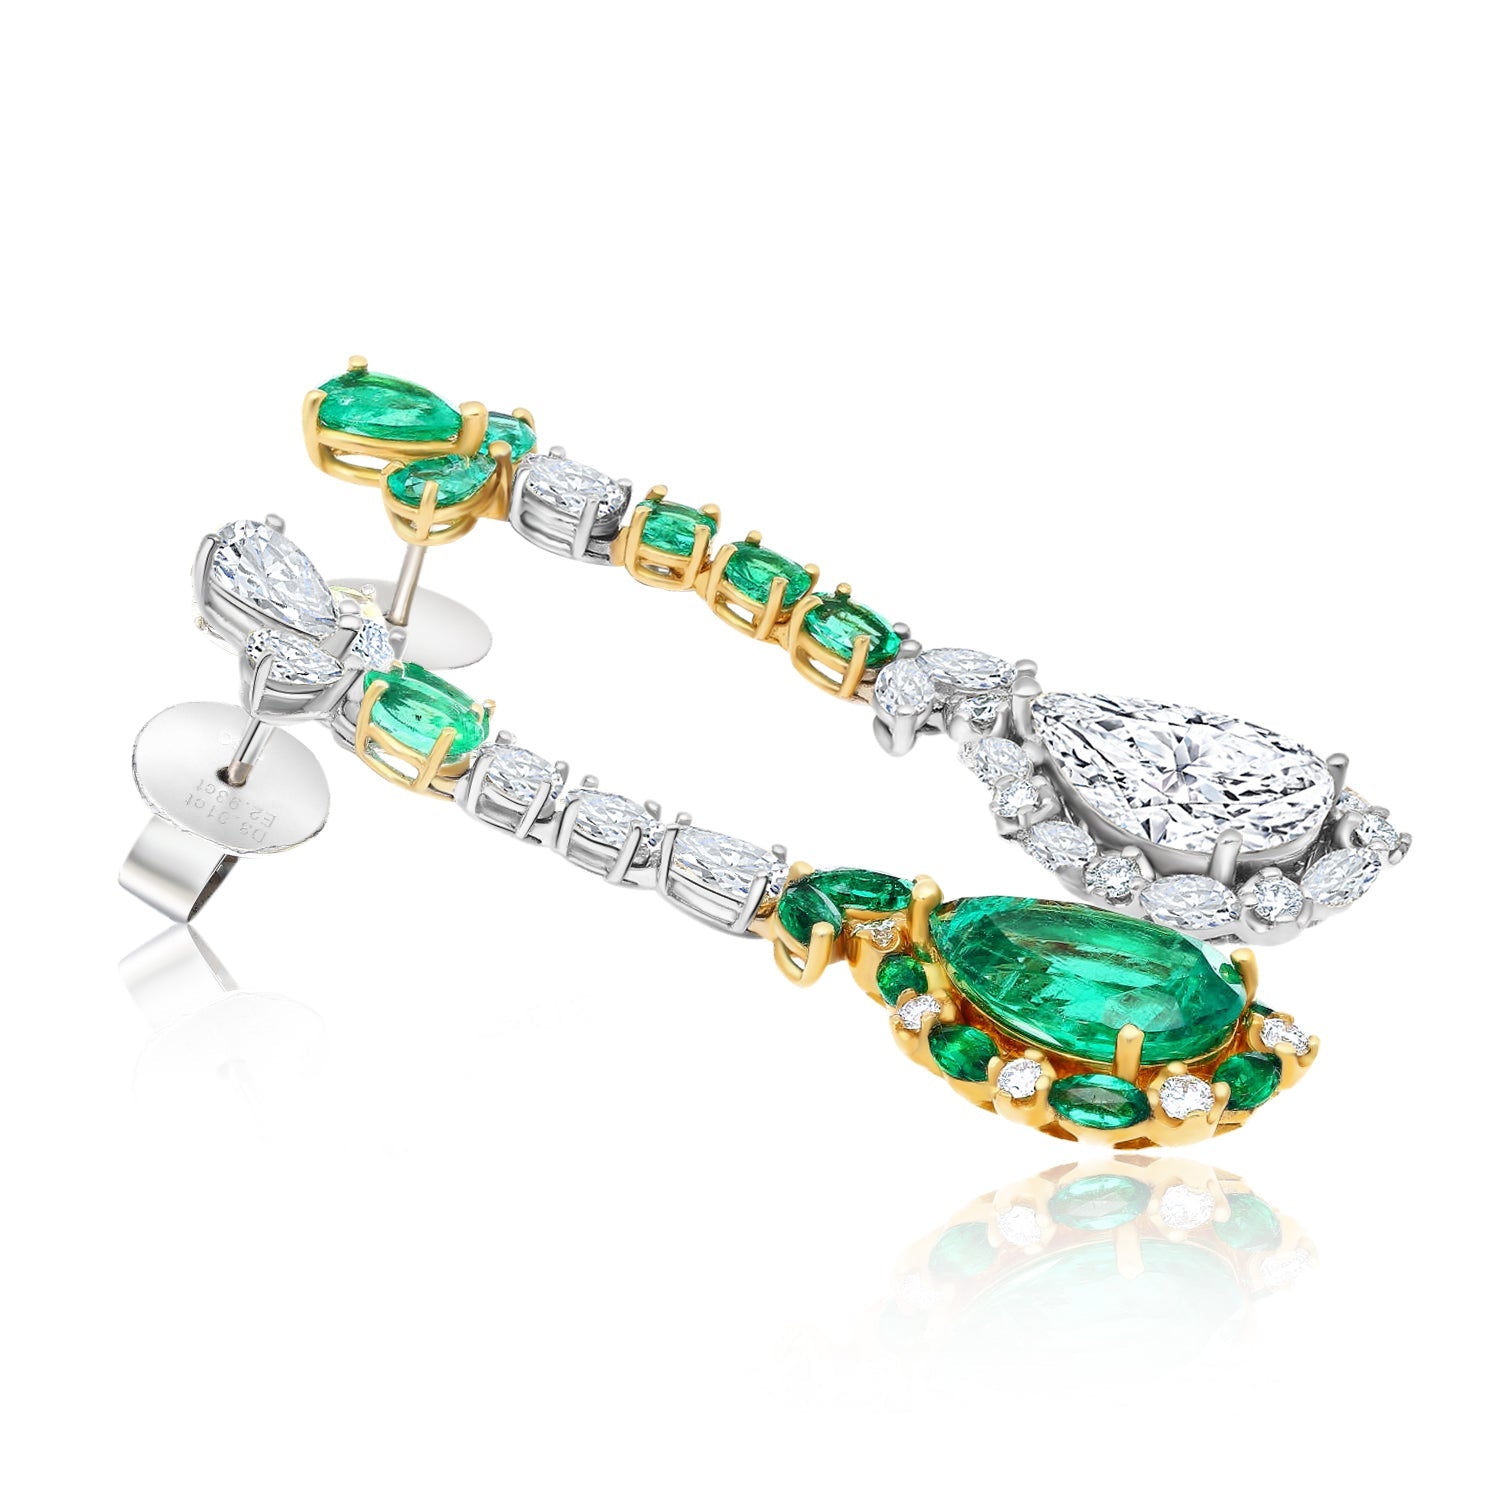 10 Carat Natural Emerald and Diamond Mirrored Drop Earrings in 18K Gold